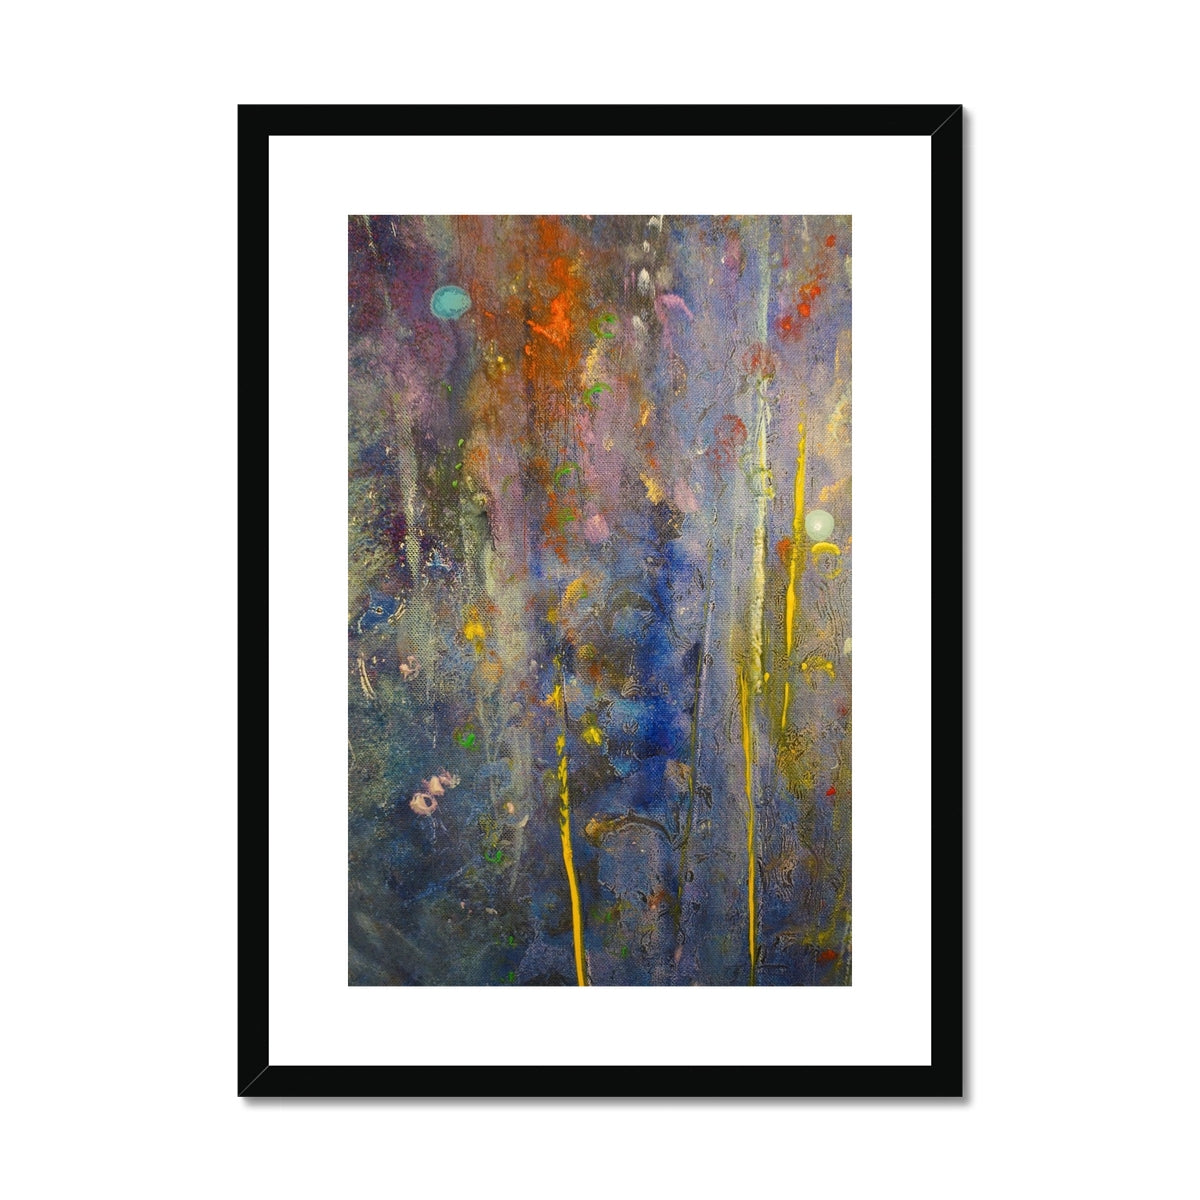 Cairngorms Waterfall Abstract Painting | Framed & Mounted Prints From Scotland-Framed & Mounted Prints-Abstract & Impressionistic Art Gallery-A2 Portrait-Black Frame-Paintings, Prints, Homeware, Art Gifts From Scotland By Scottish Artist Kevin Hunter